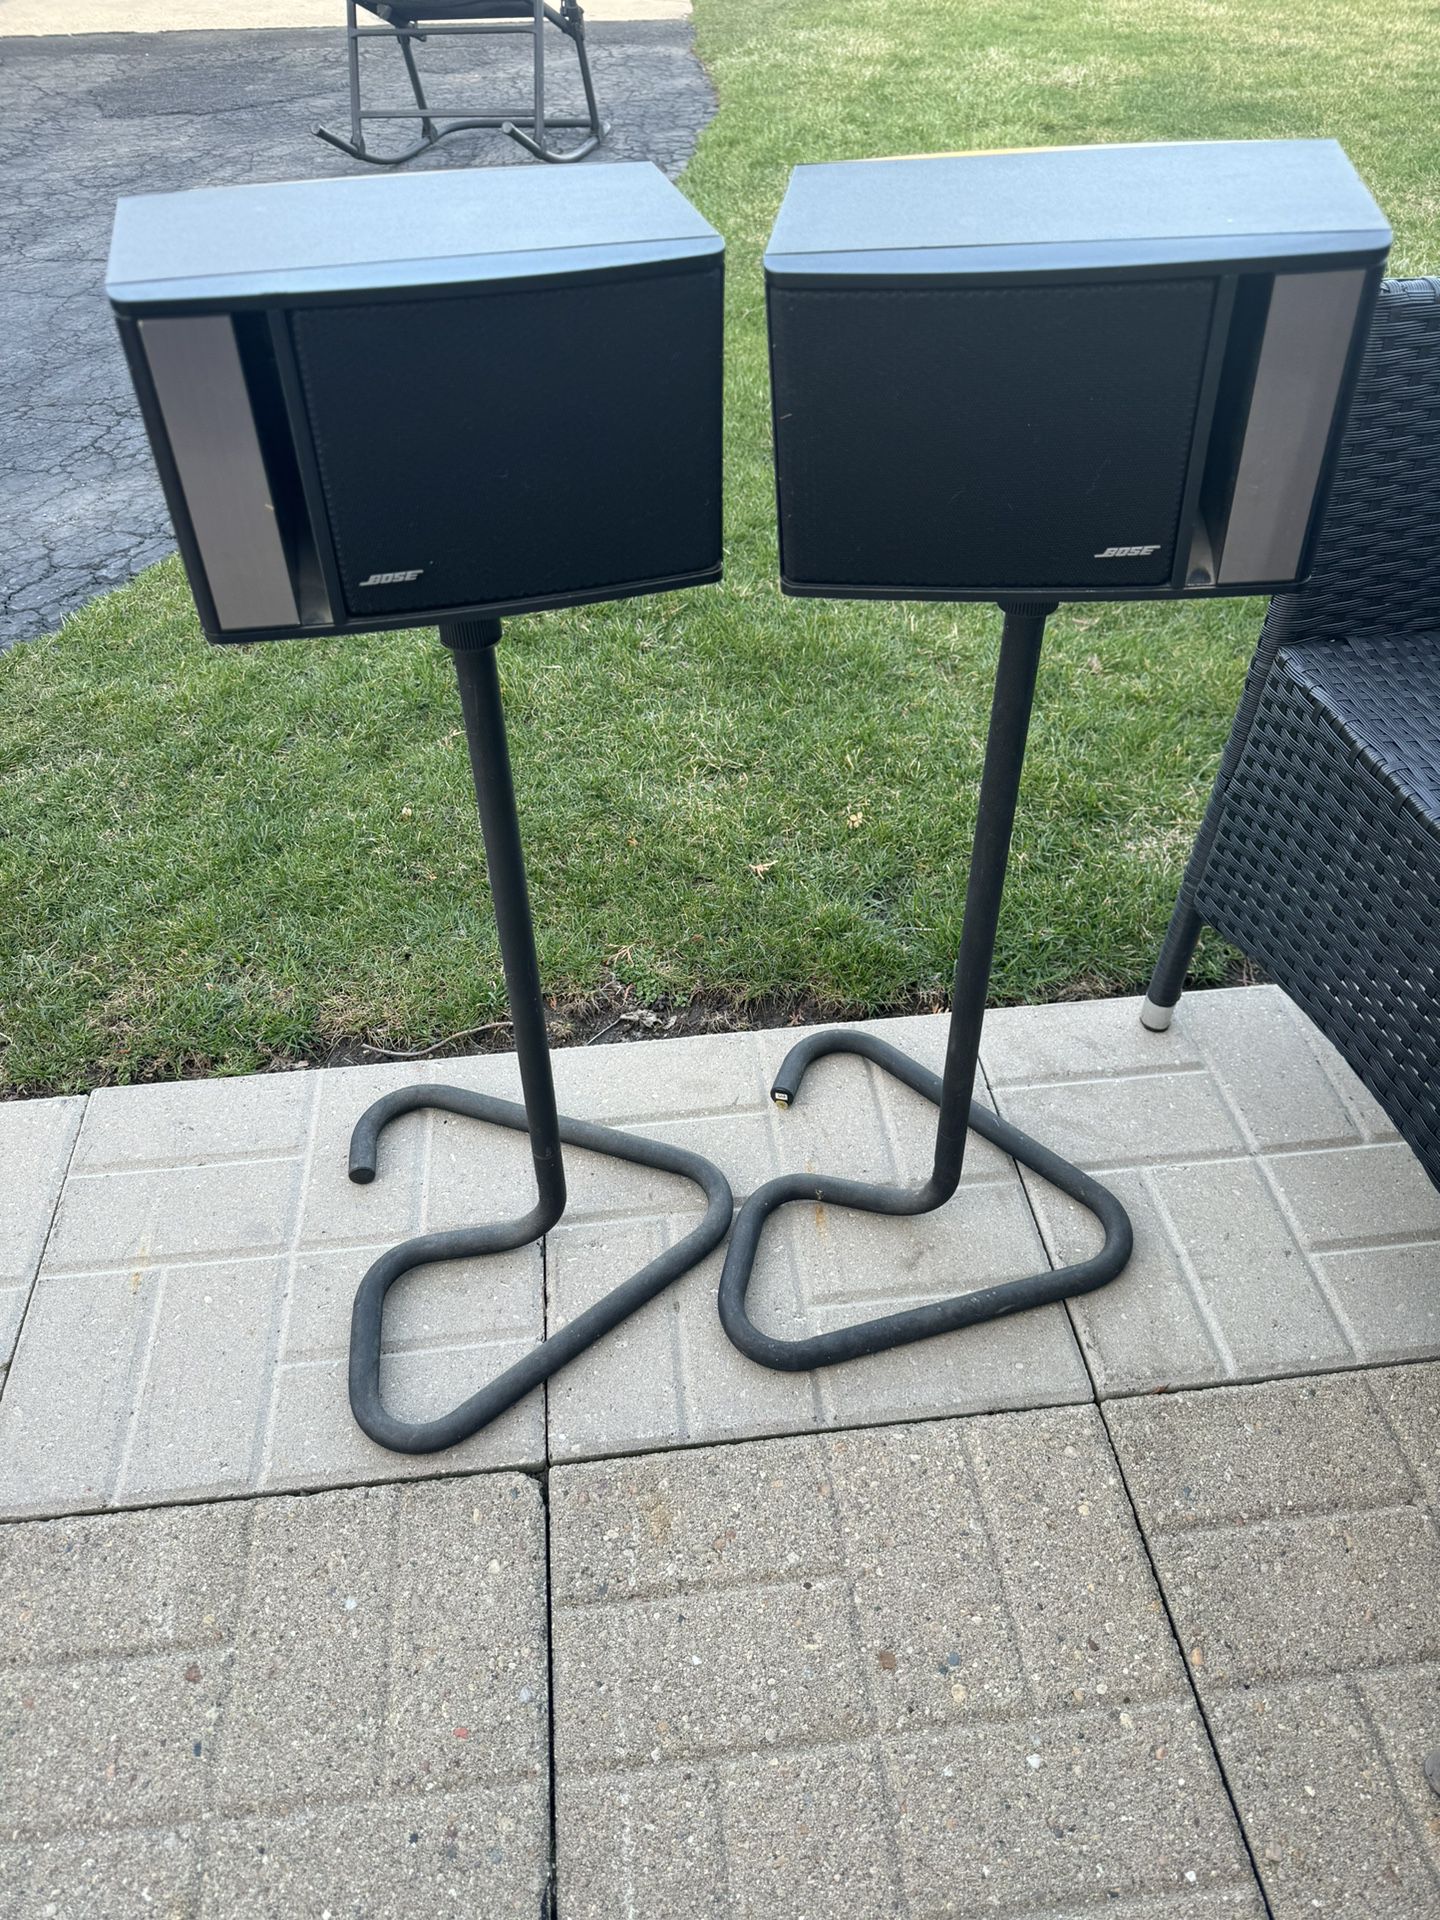 2 Bose speakers with stands 